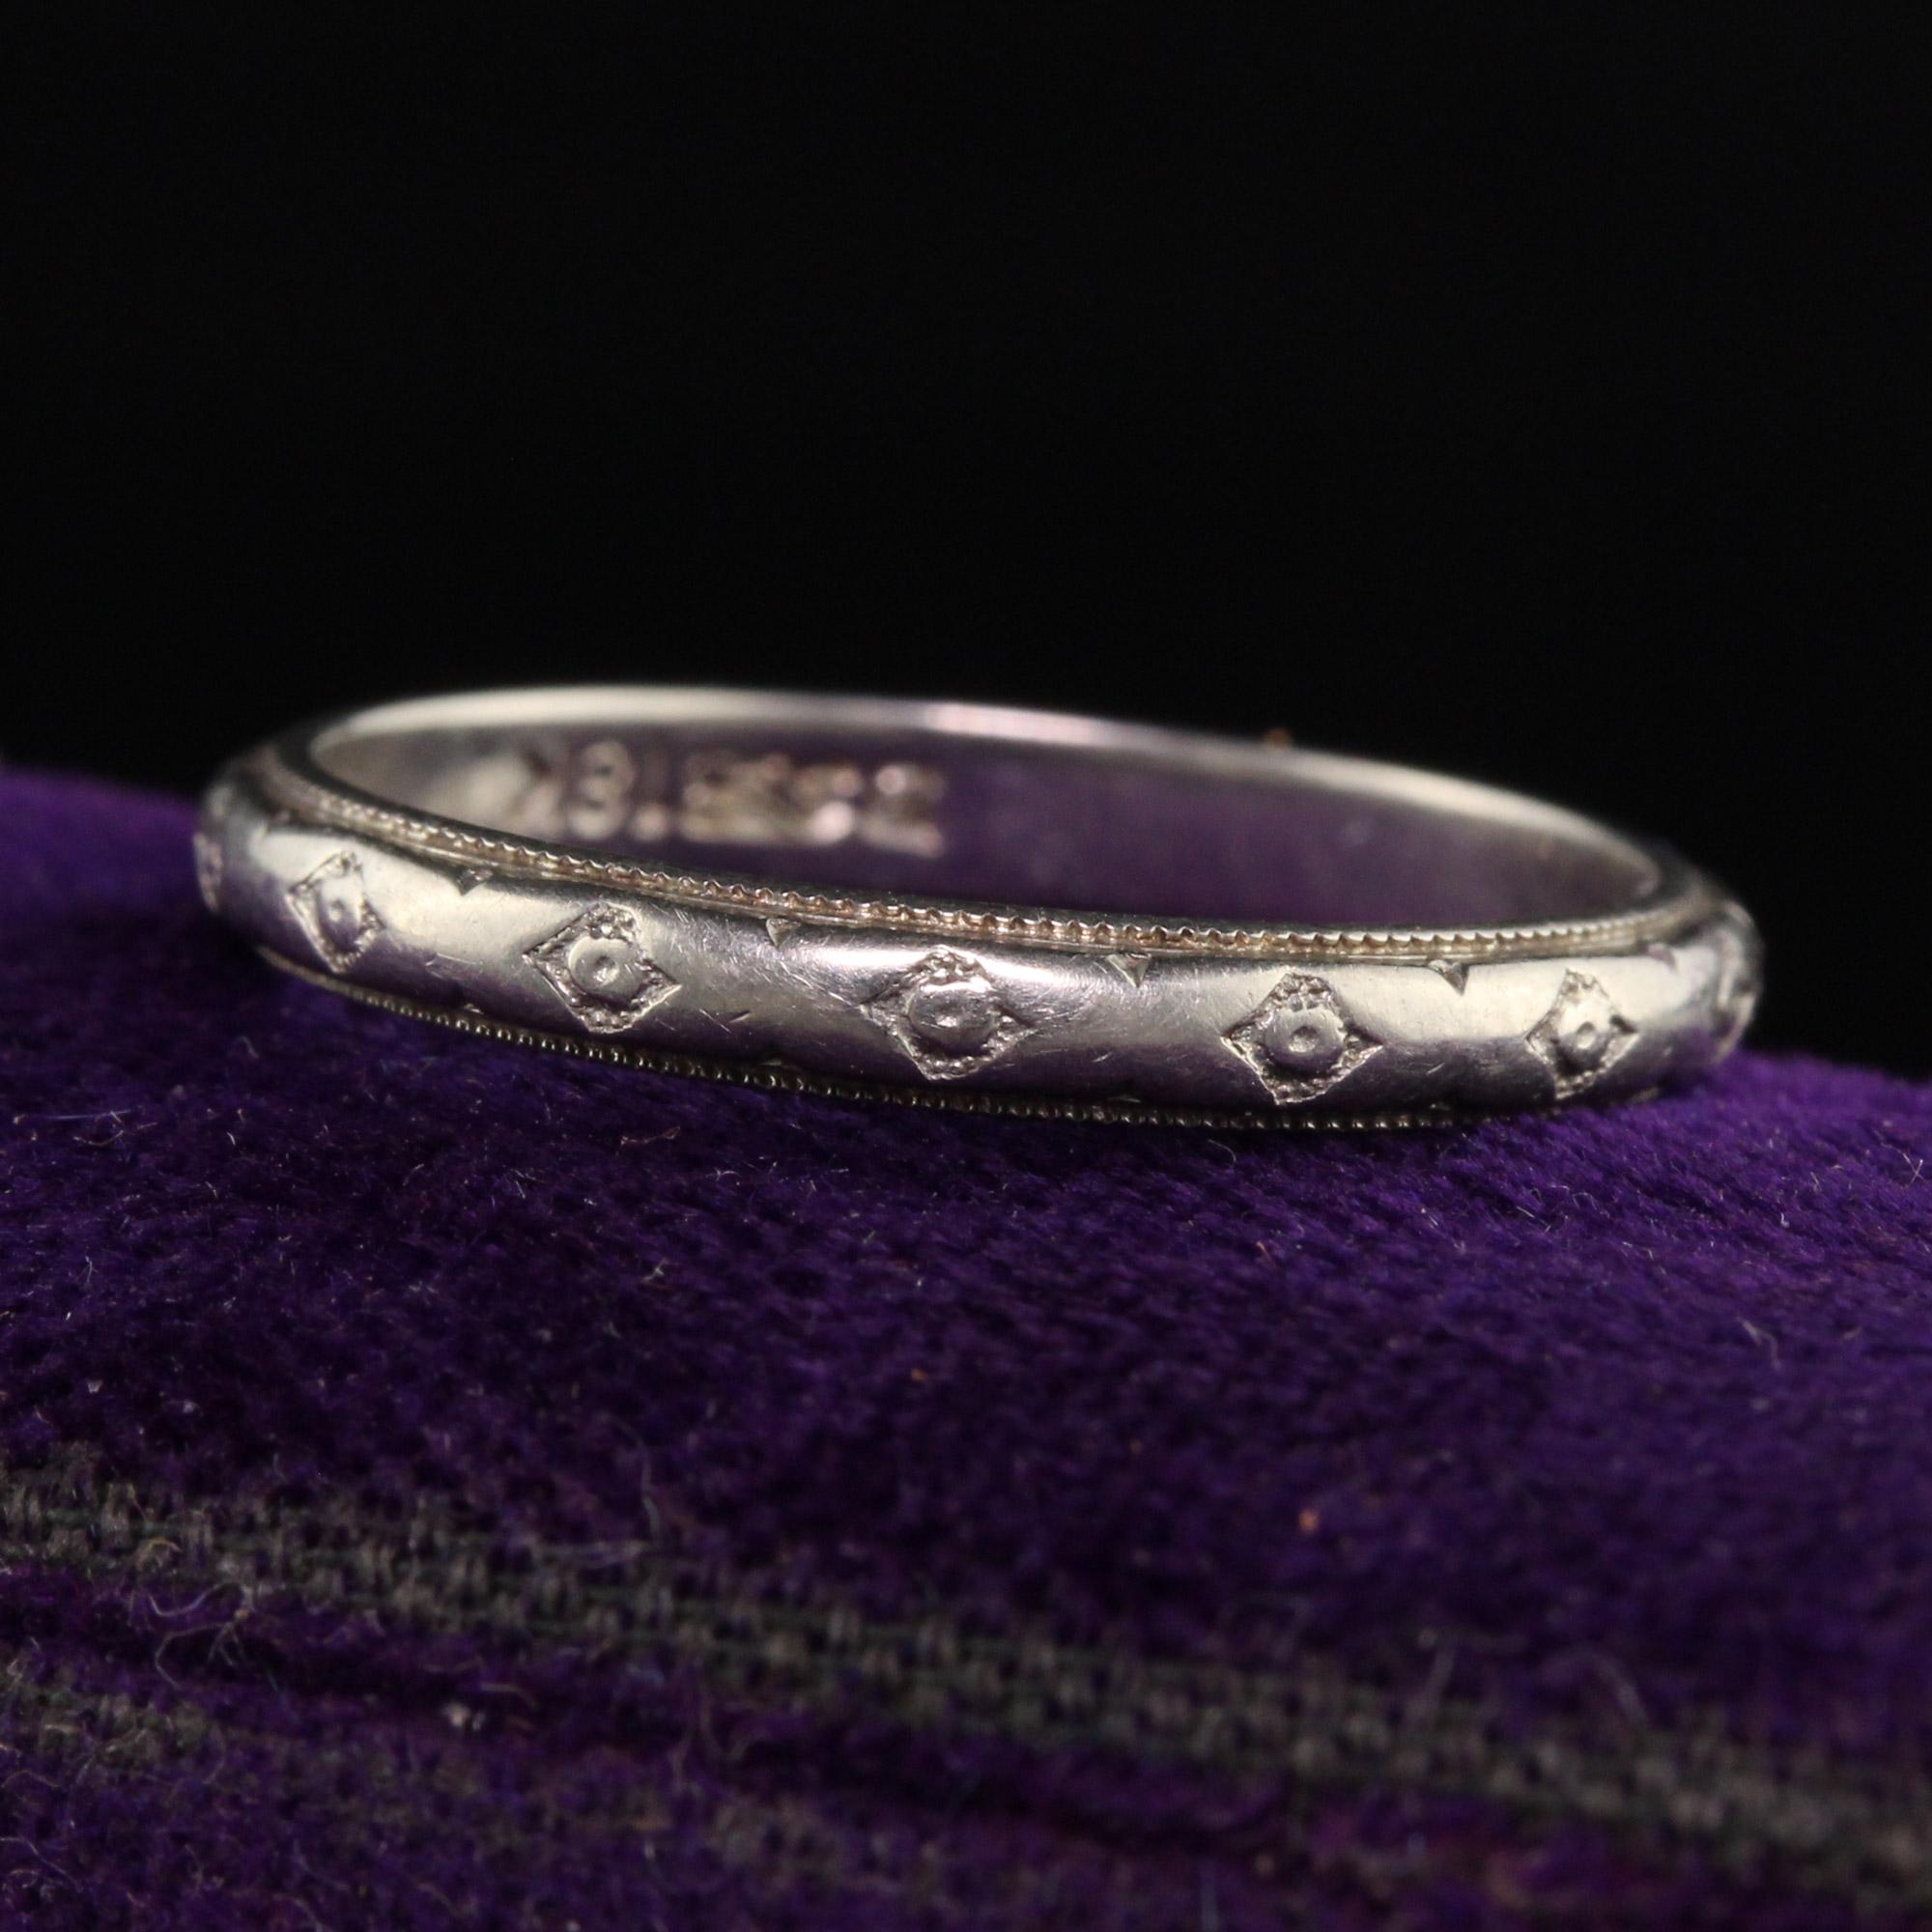 Beautiful Antique Art Deco 18K White Gold Engraved Wedding Band - Size 7. This gorgeous wedding band is crafted in 18k white gold. The band is nicely engraved around the entire ring and has some makers mark inside the band but we can't make it